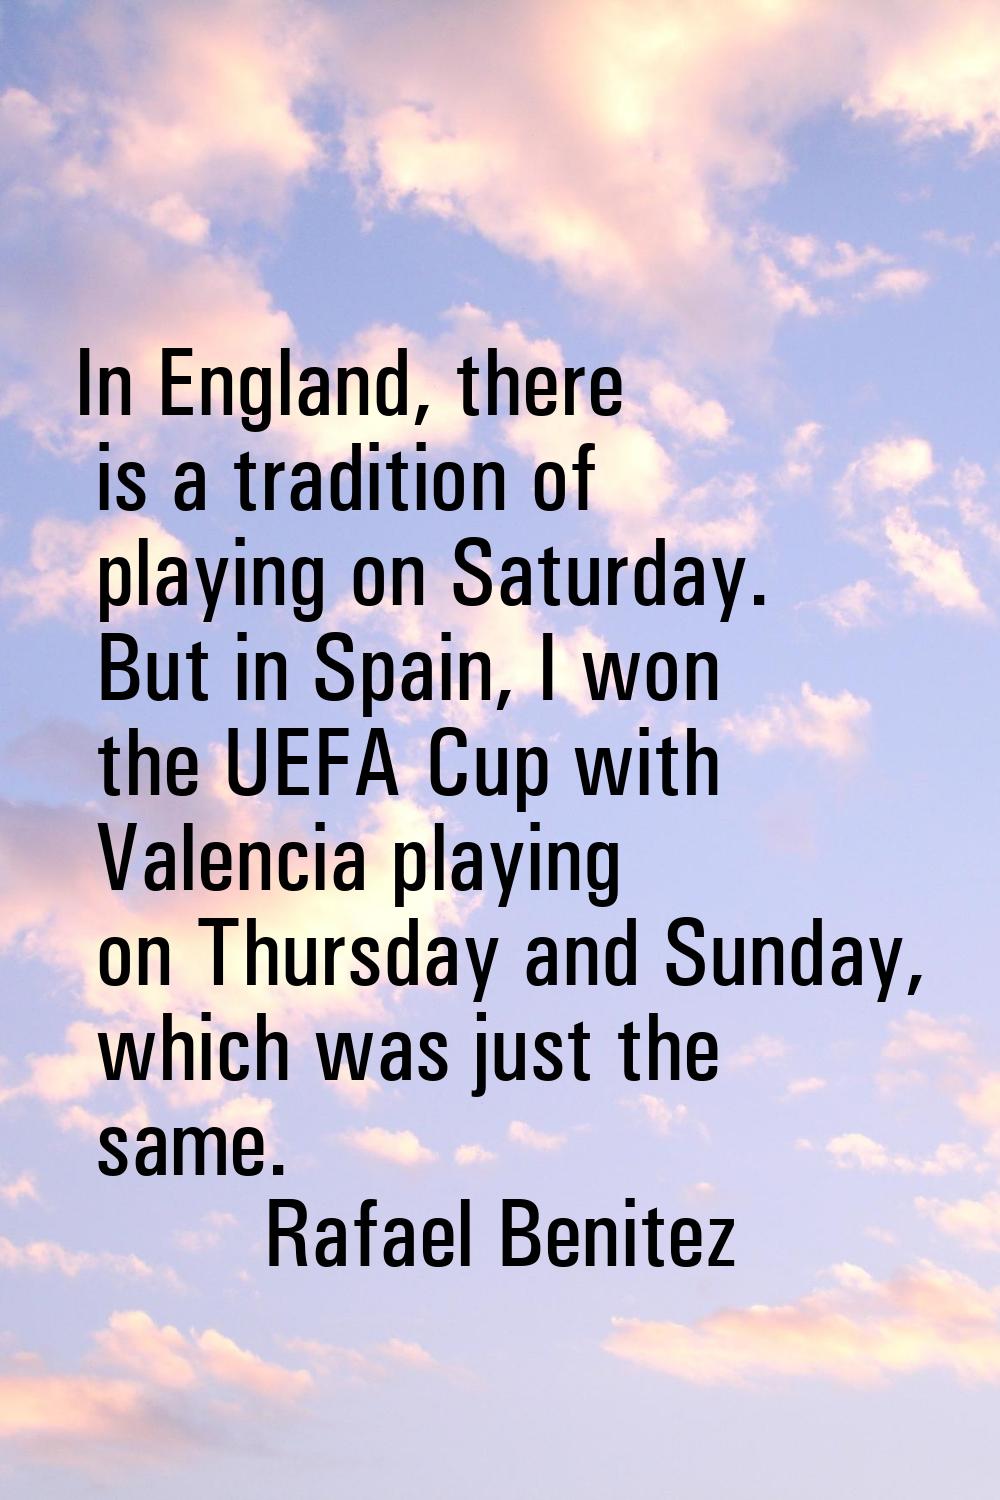 In England, there is a tradition of playing on Saturday. But in Spain, I won the UEFA Cup with Vale